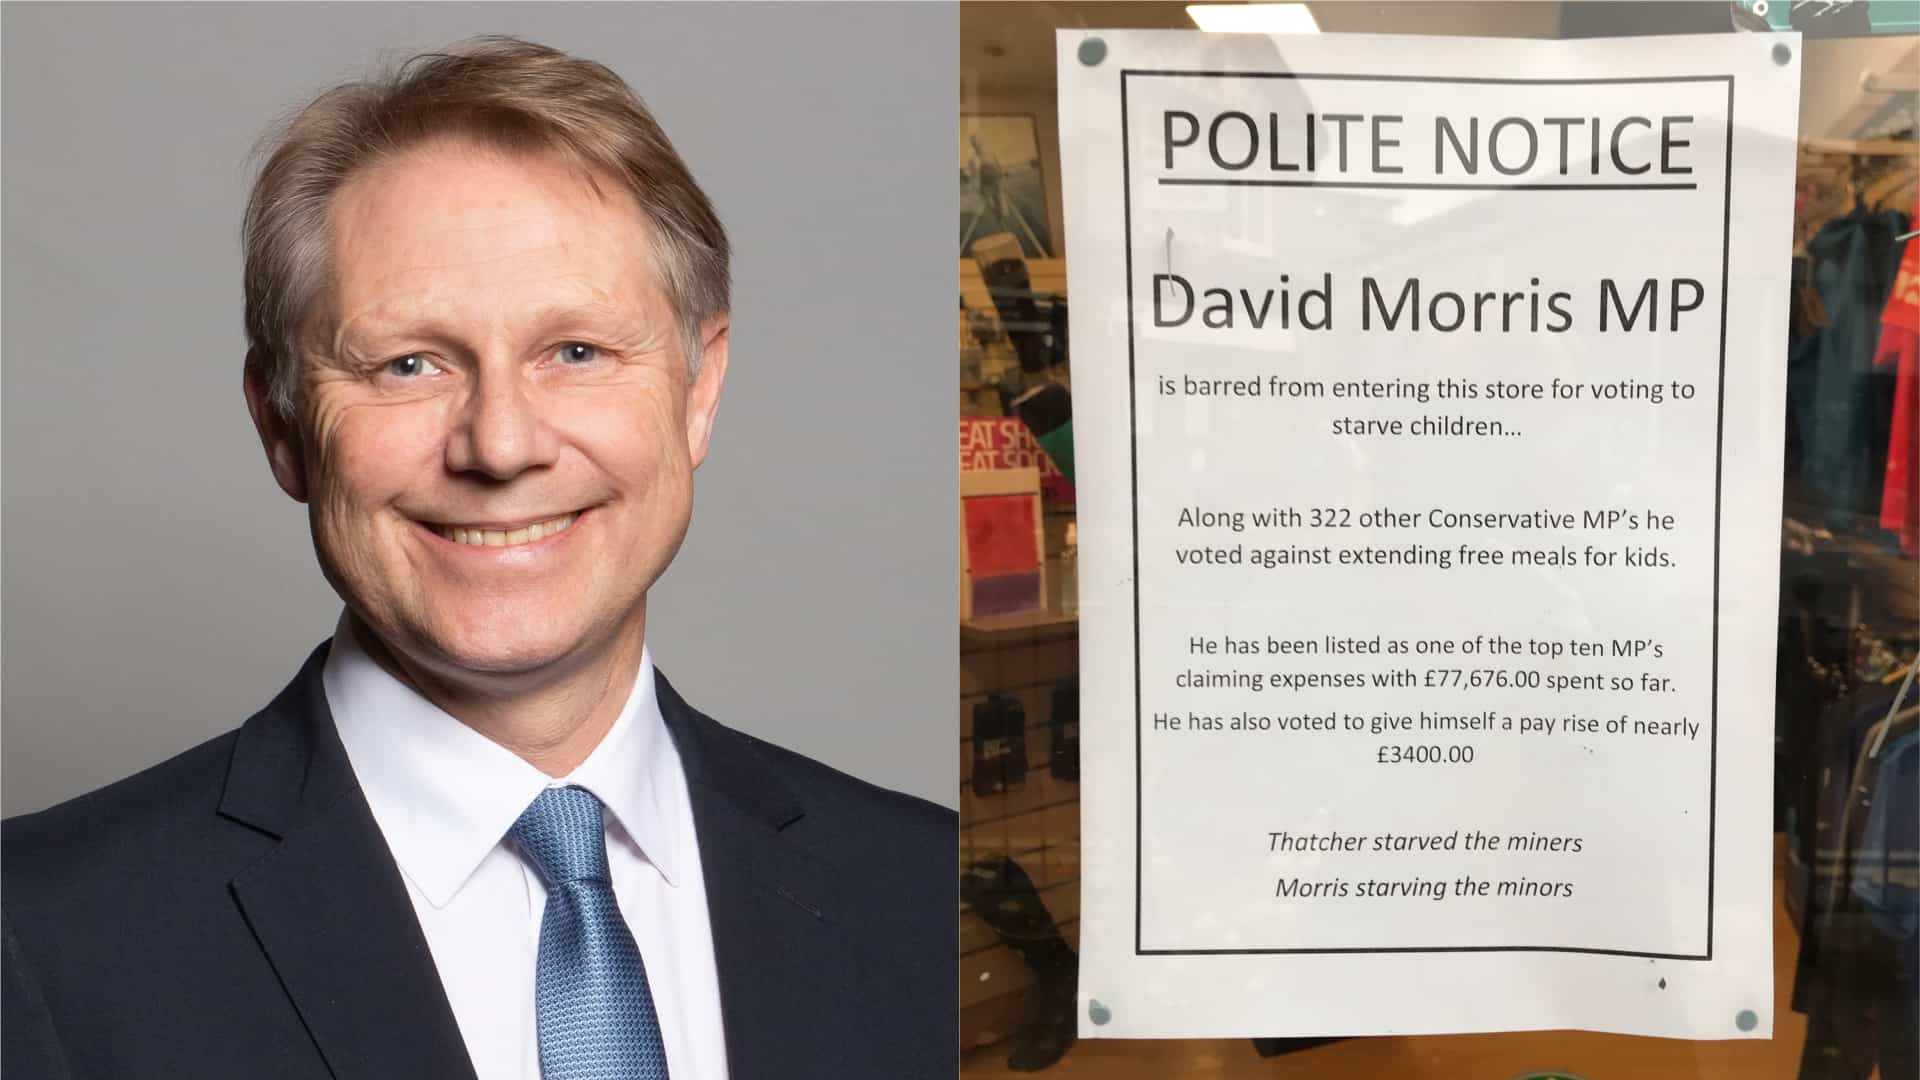 Another shop bans local Tory MP for ‘voting to starve children’